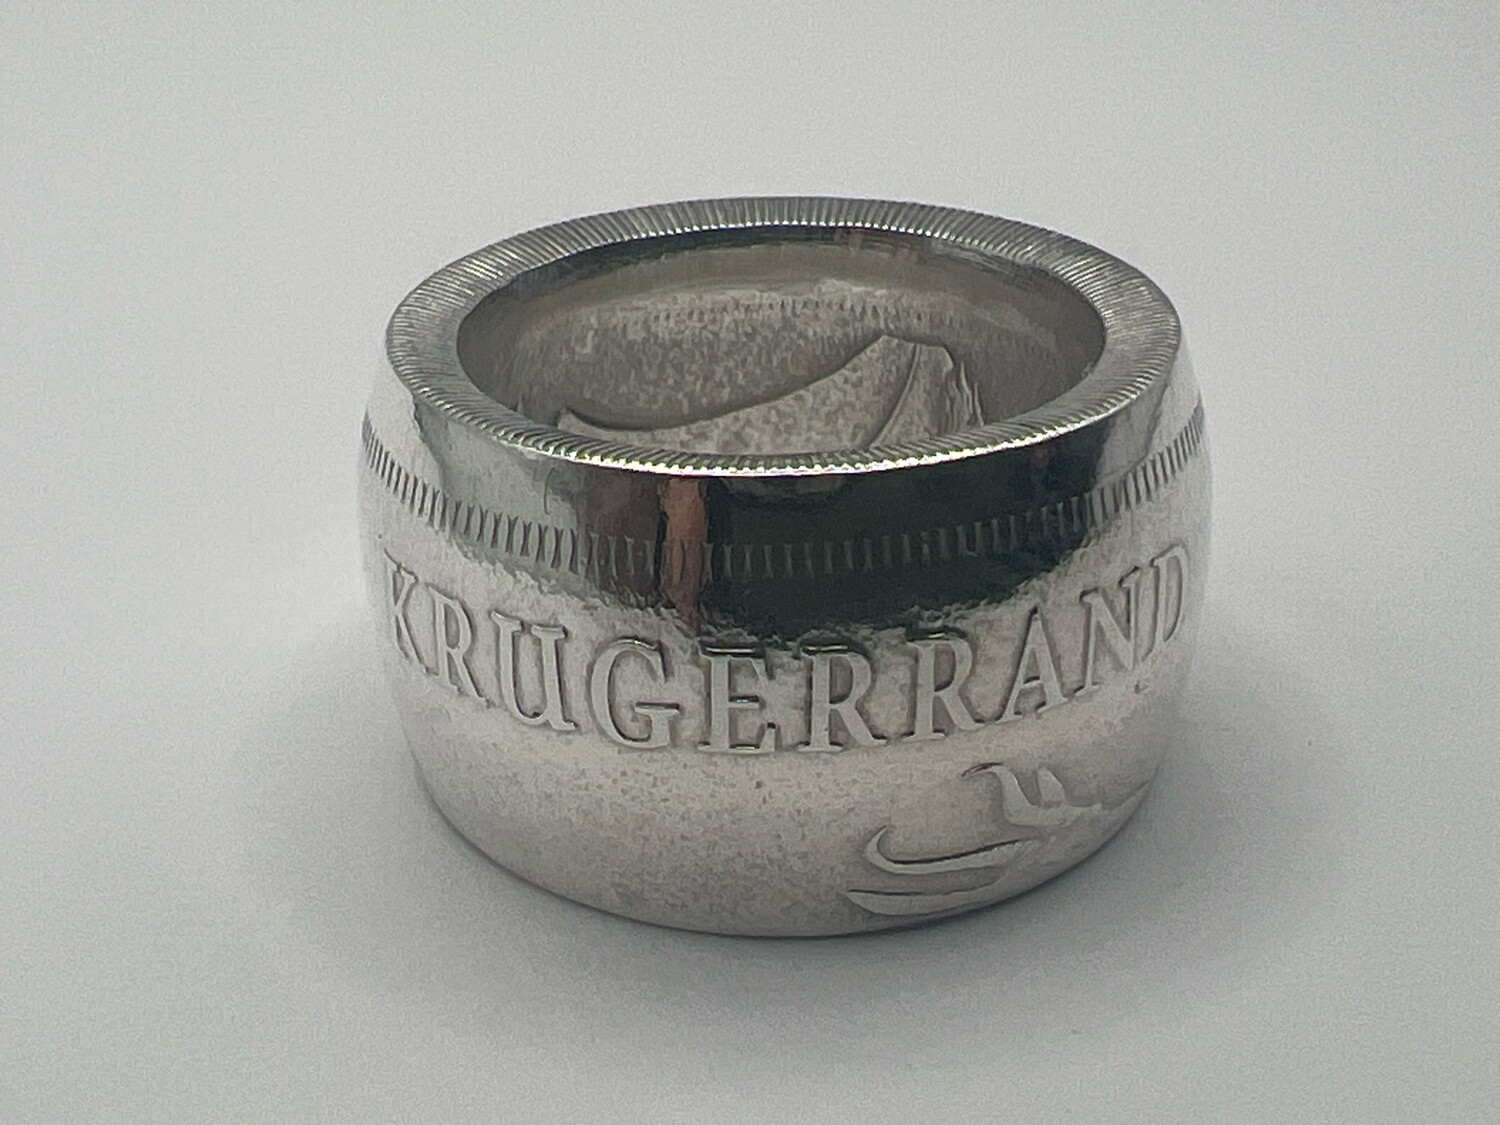 2022 Krugerrand Fine Silver Coin Ring